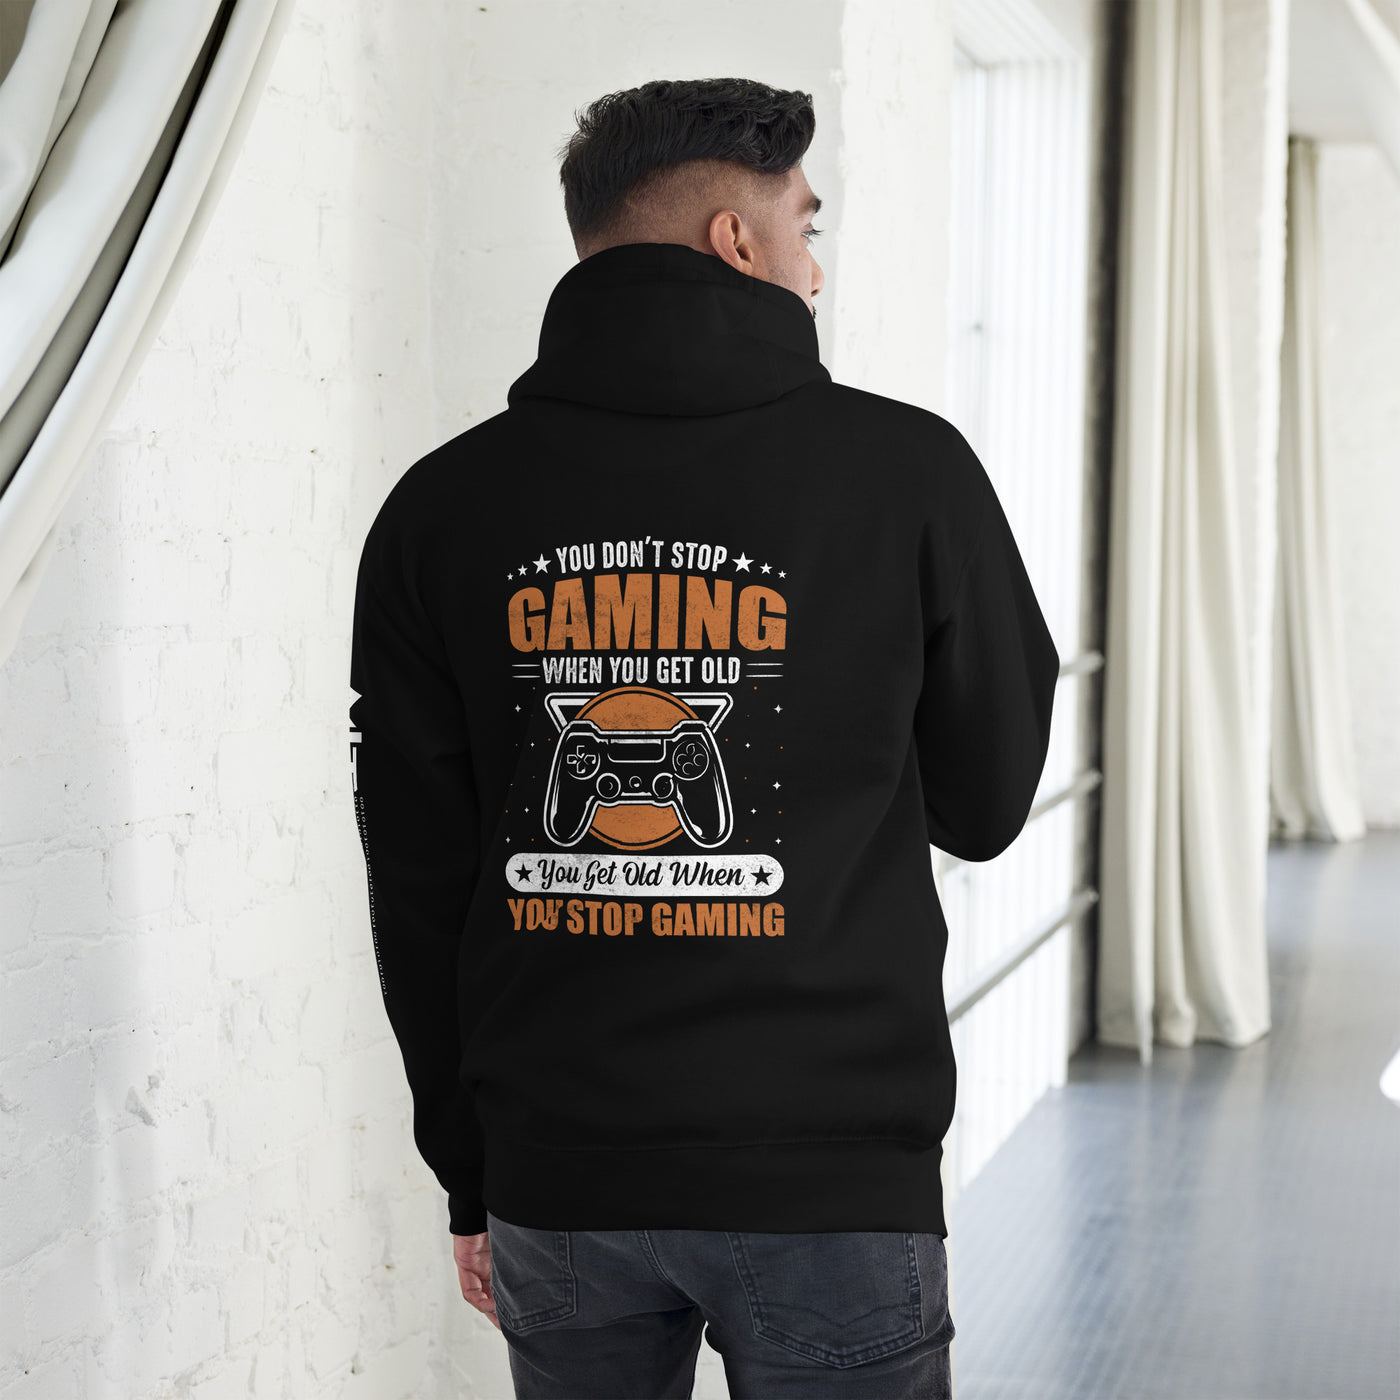 You don't Stop gaming, when you Get old, you Get old, when you Stop Gaming - Unisex Hoodie ( Back Print )